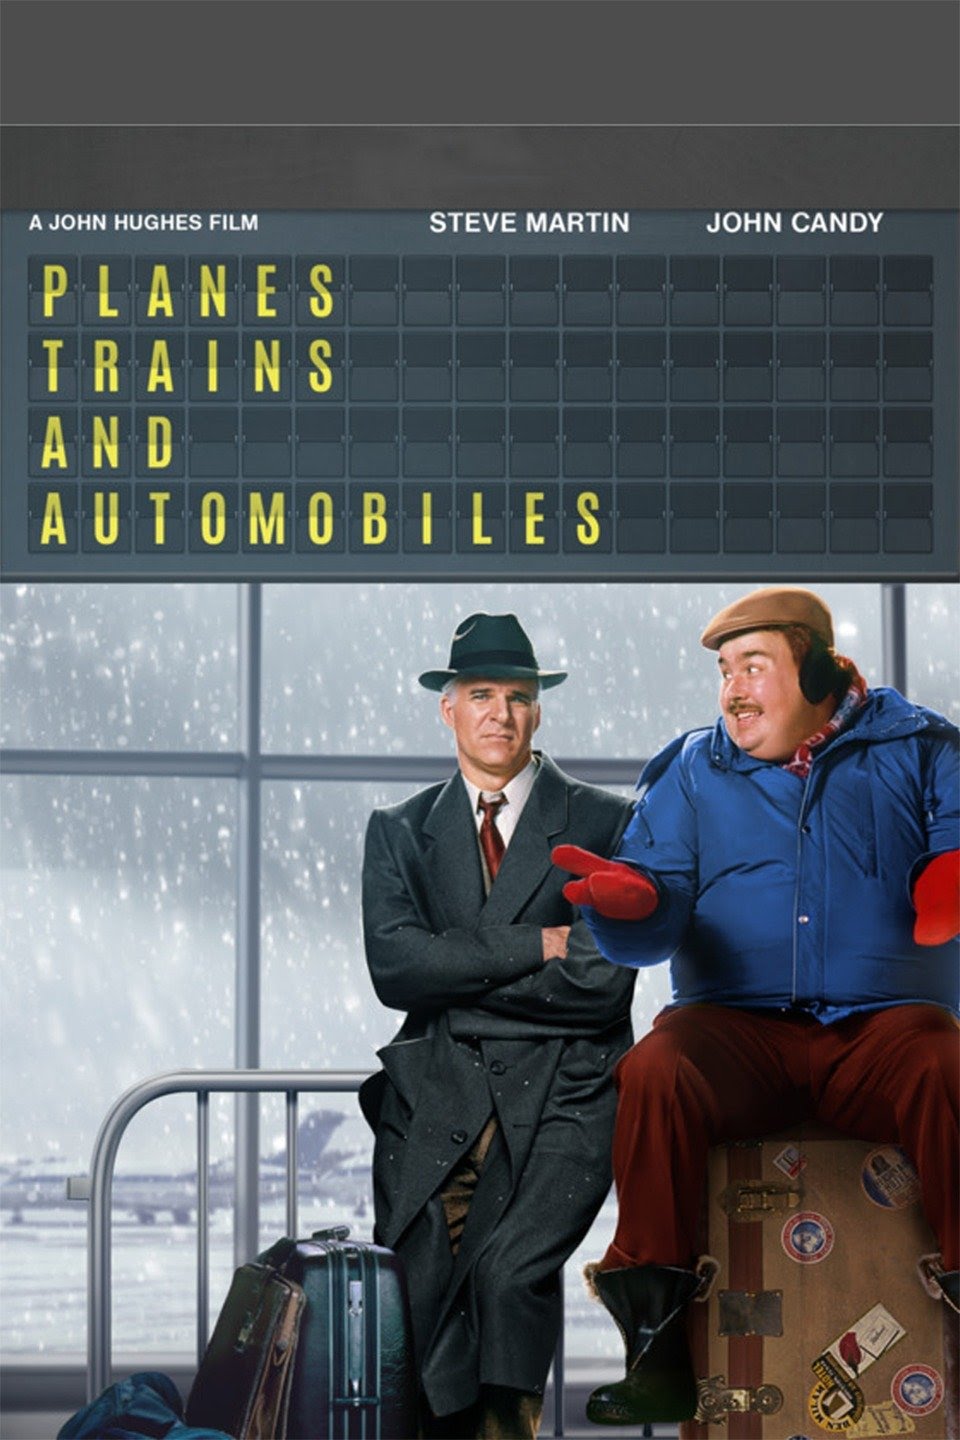 Planes, Trains And Automobiles (1987) iTunes HD* redemption only